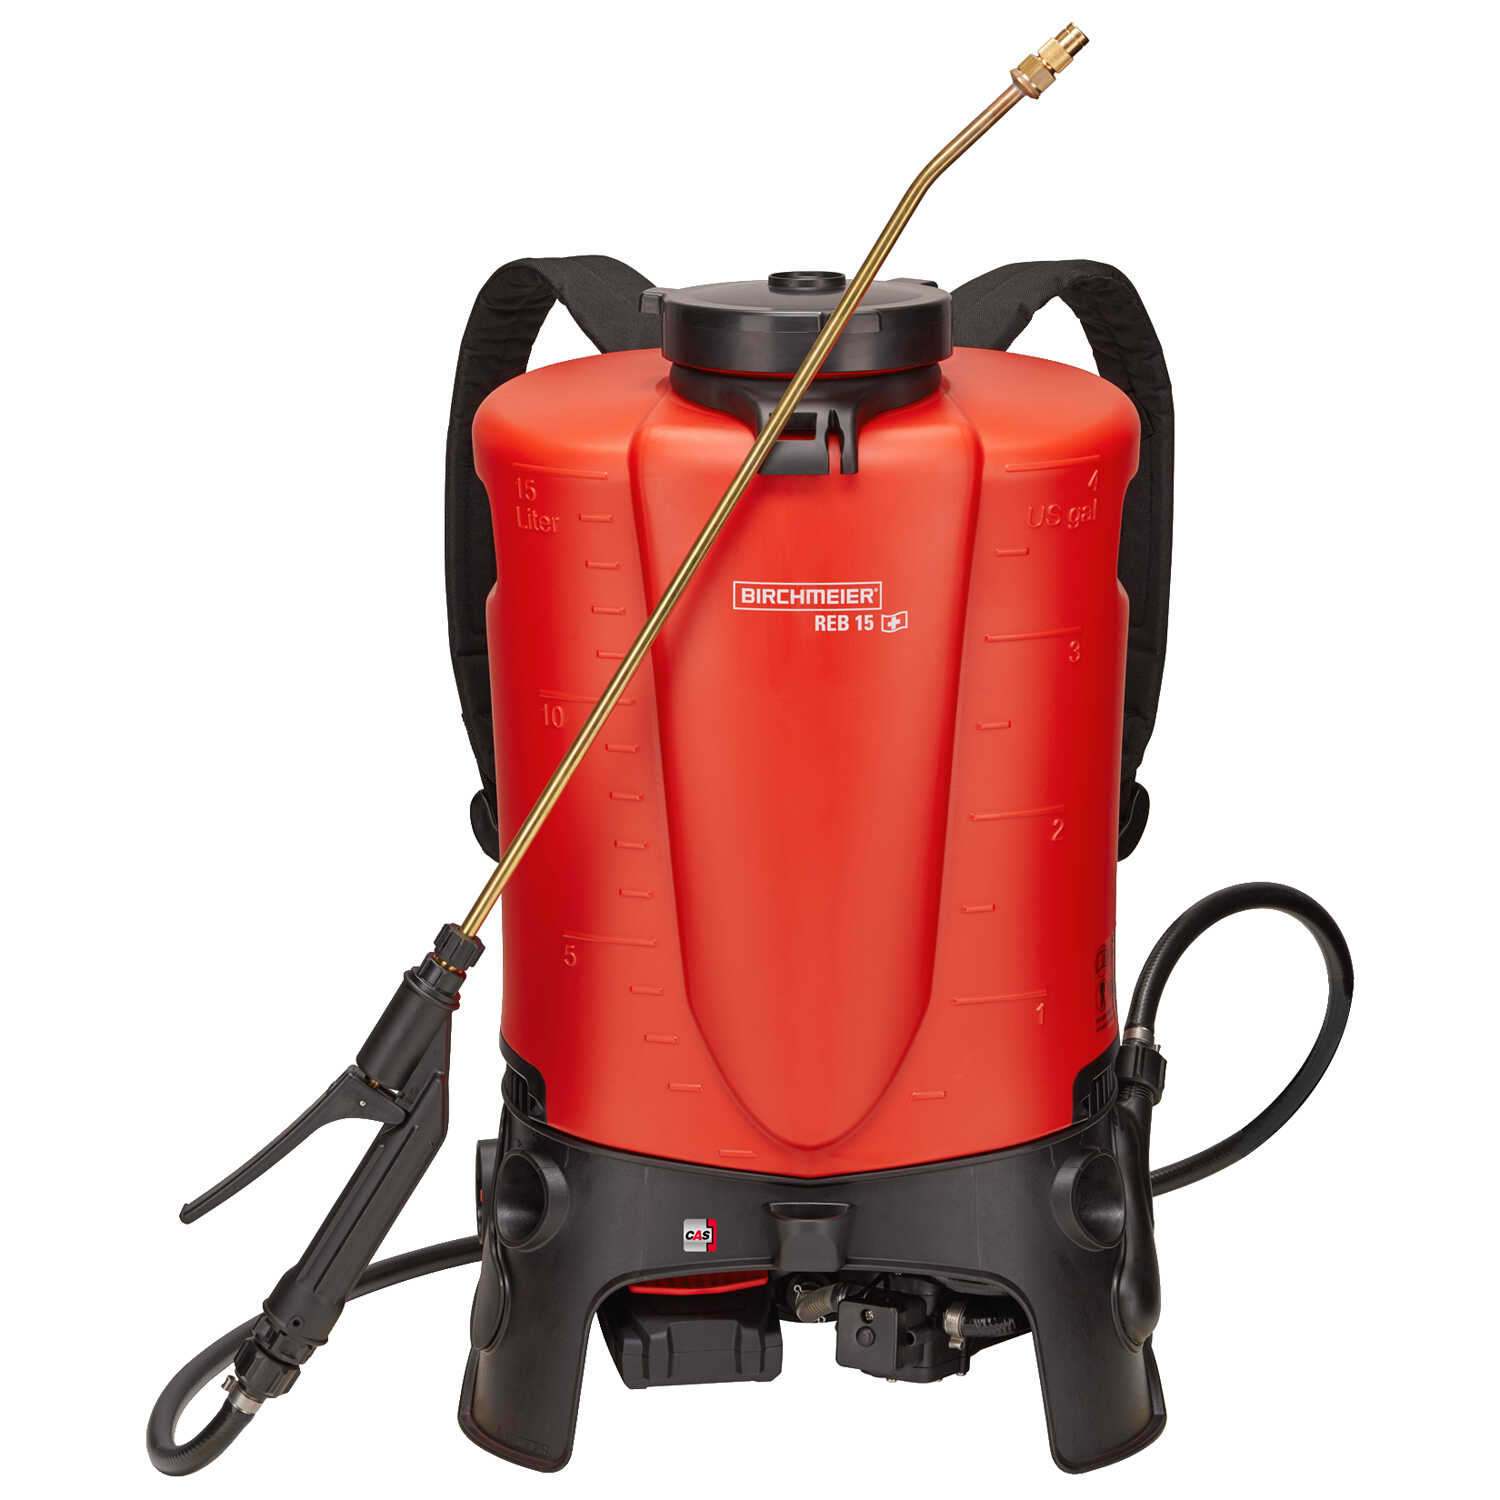 Birchmeier REB 15 LiIon Backpack Forestry Suppliers, Inc.